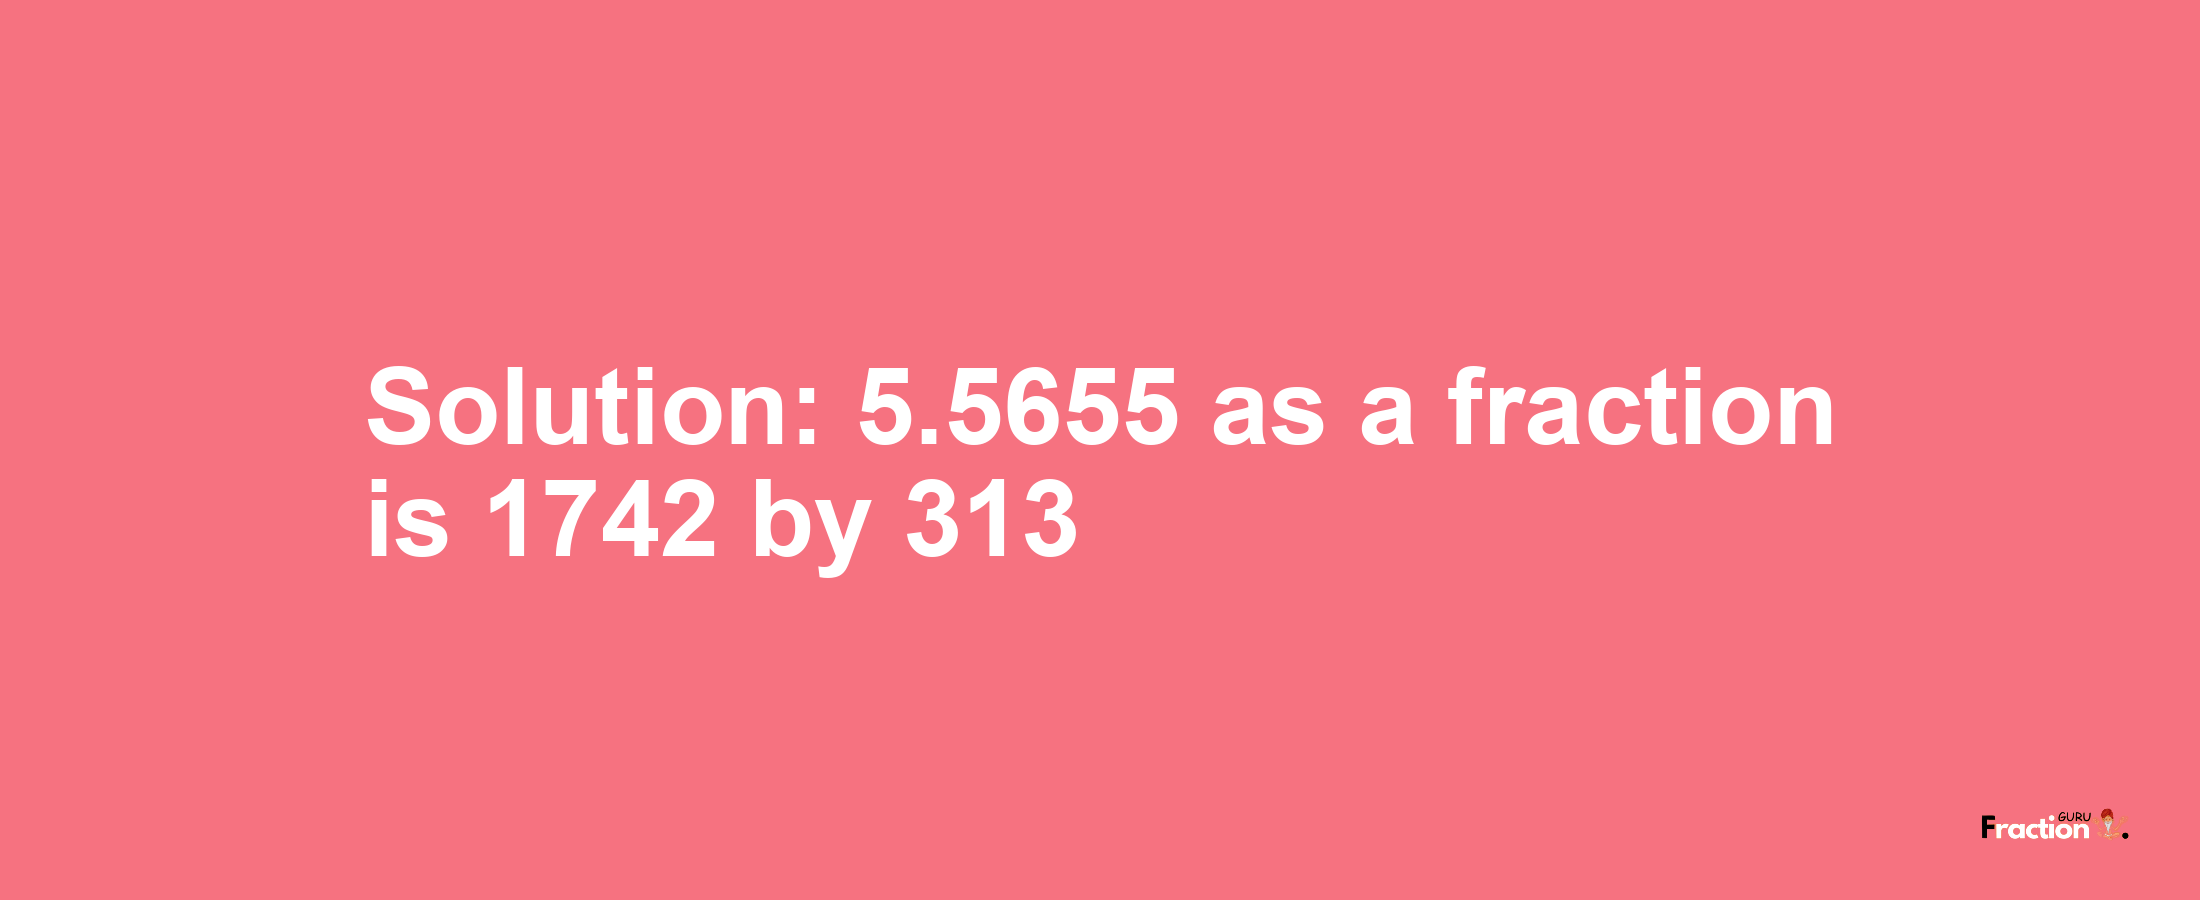 Solution:5.5655 as a fraction is 1742/313